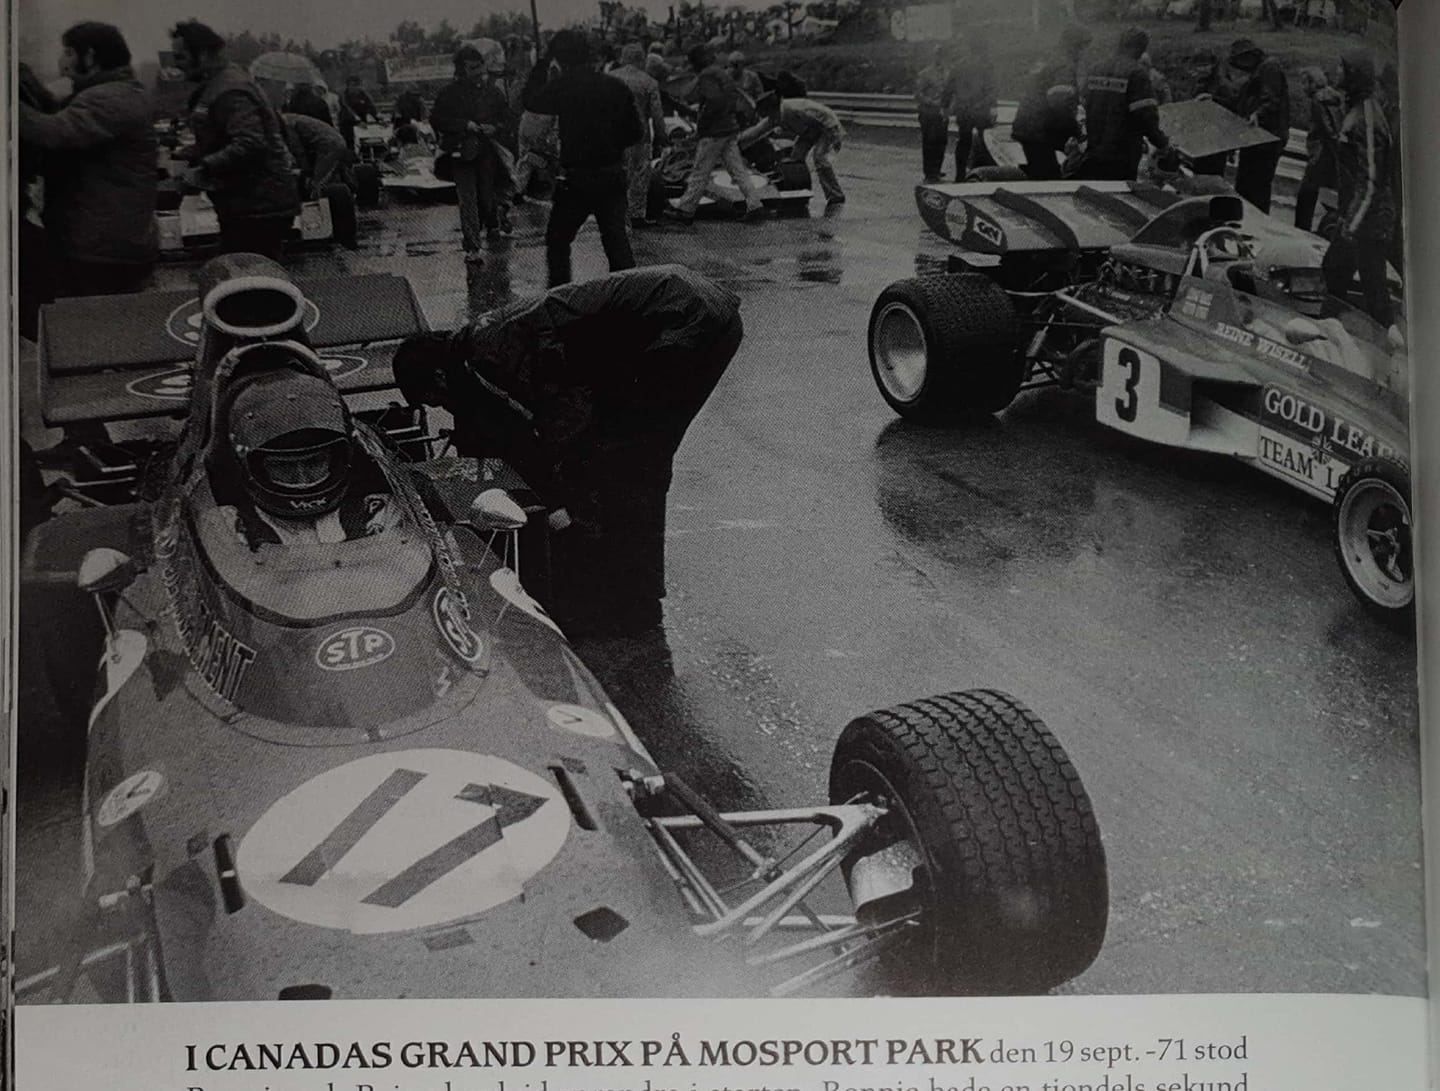 Ronnie and Reine at Mosport Park, Canada, circa on 19 September 1971.